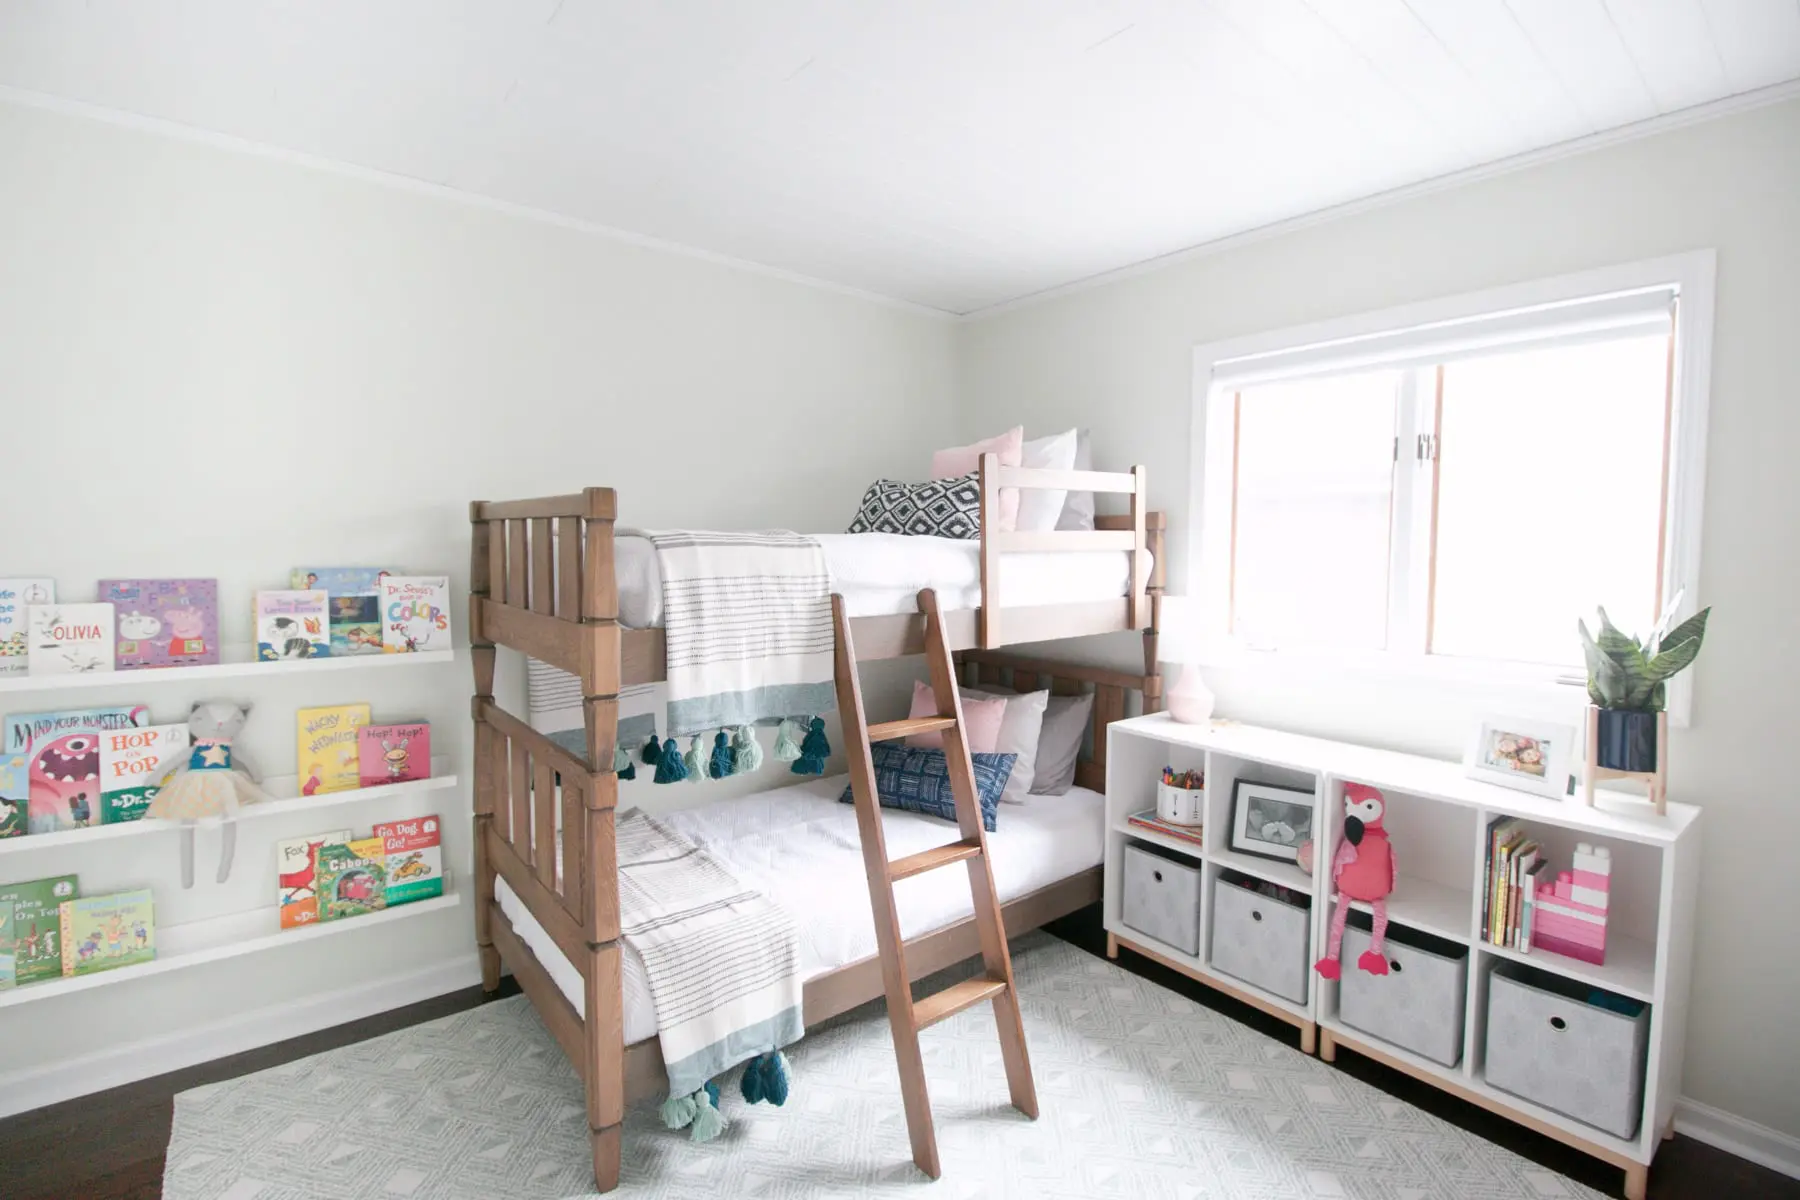 Bunkbeds and storage cubbies in this kids' room makeover. 